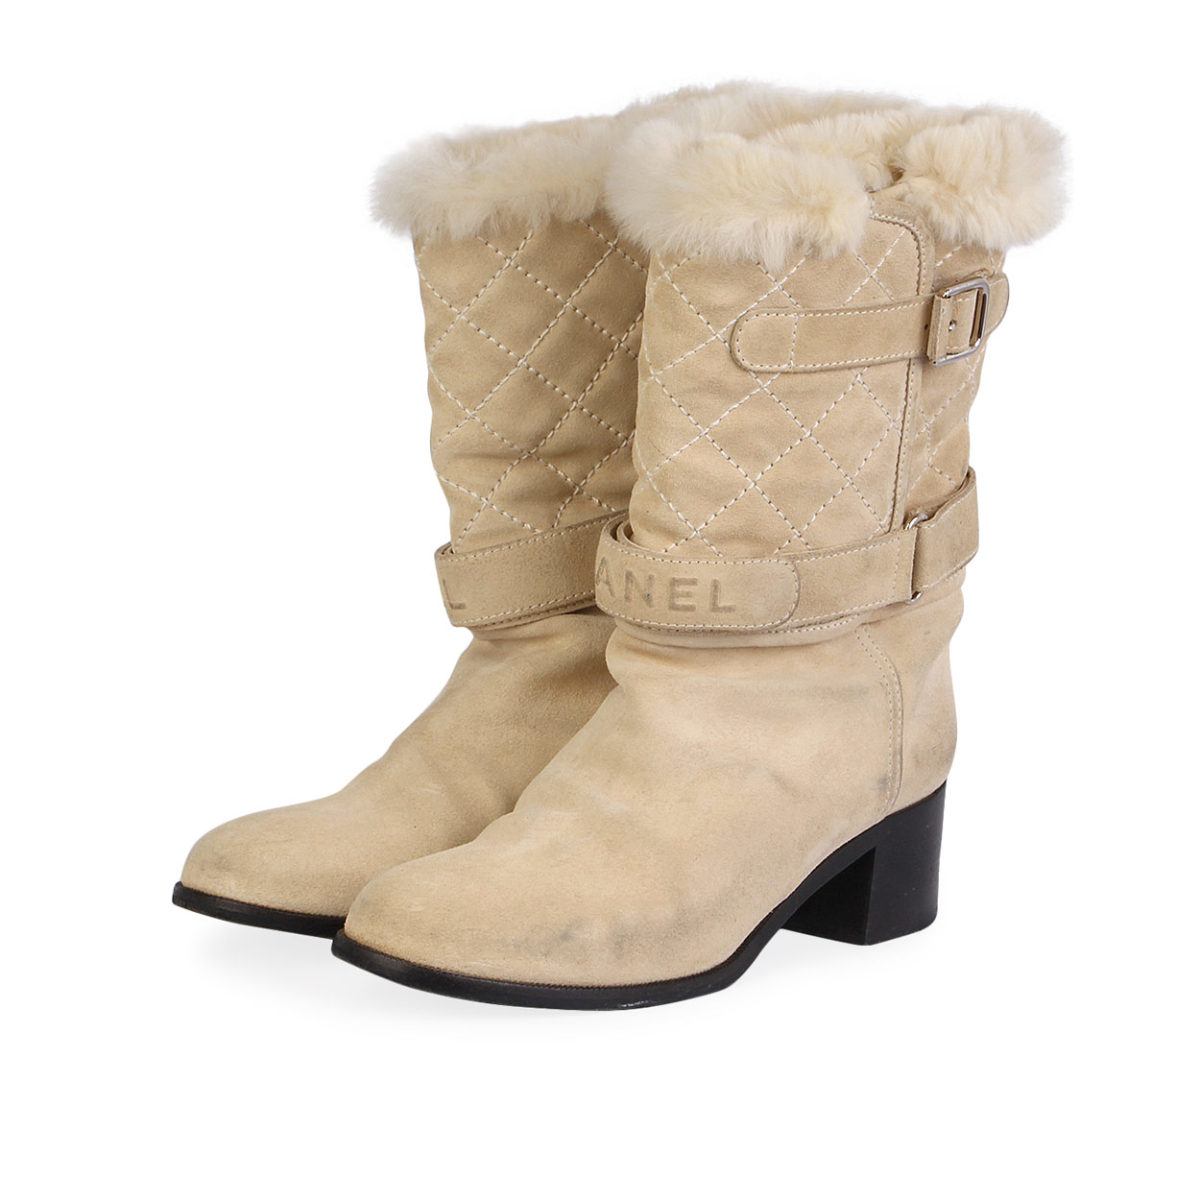 CHANEL Suede Fur Trimmed Boots Cream 